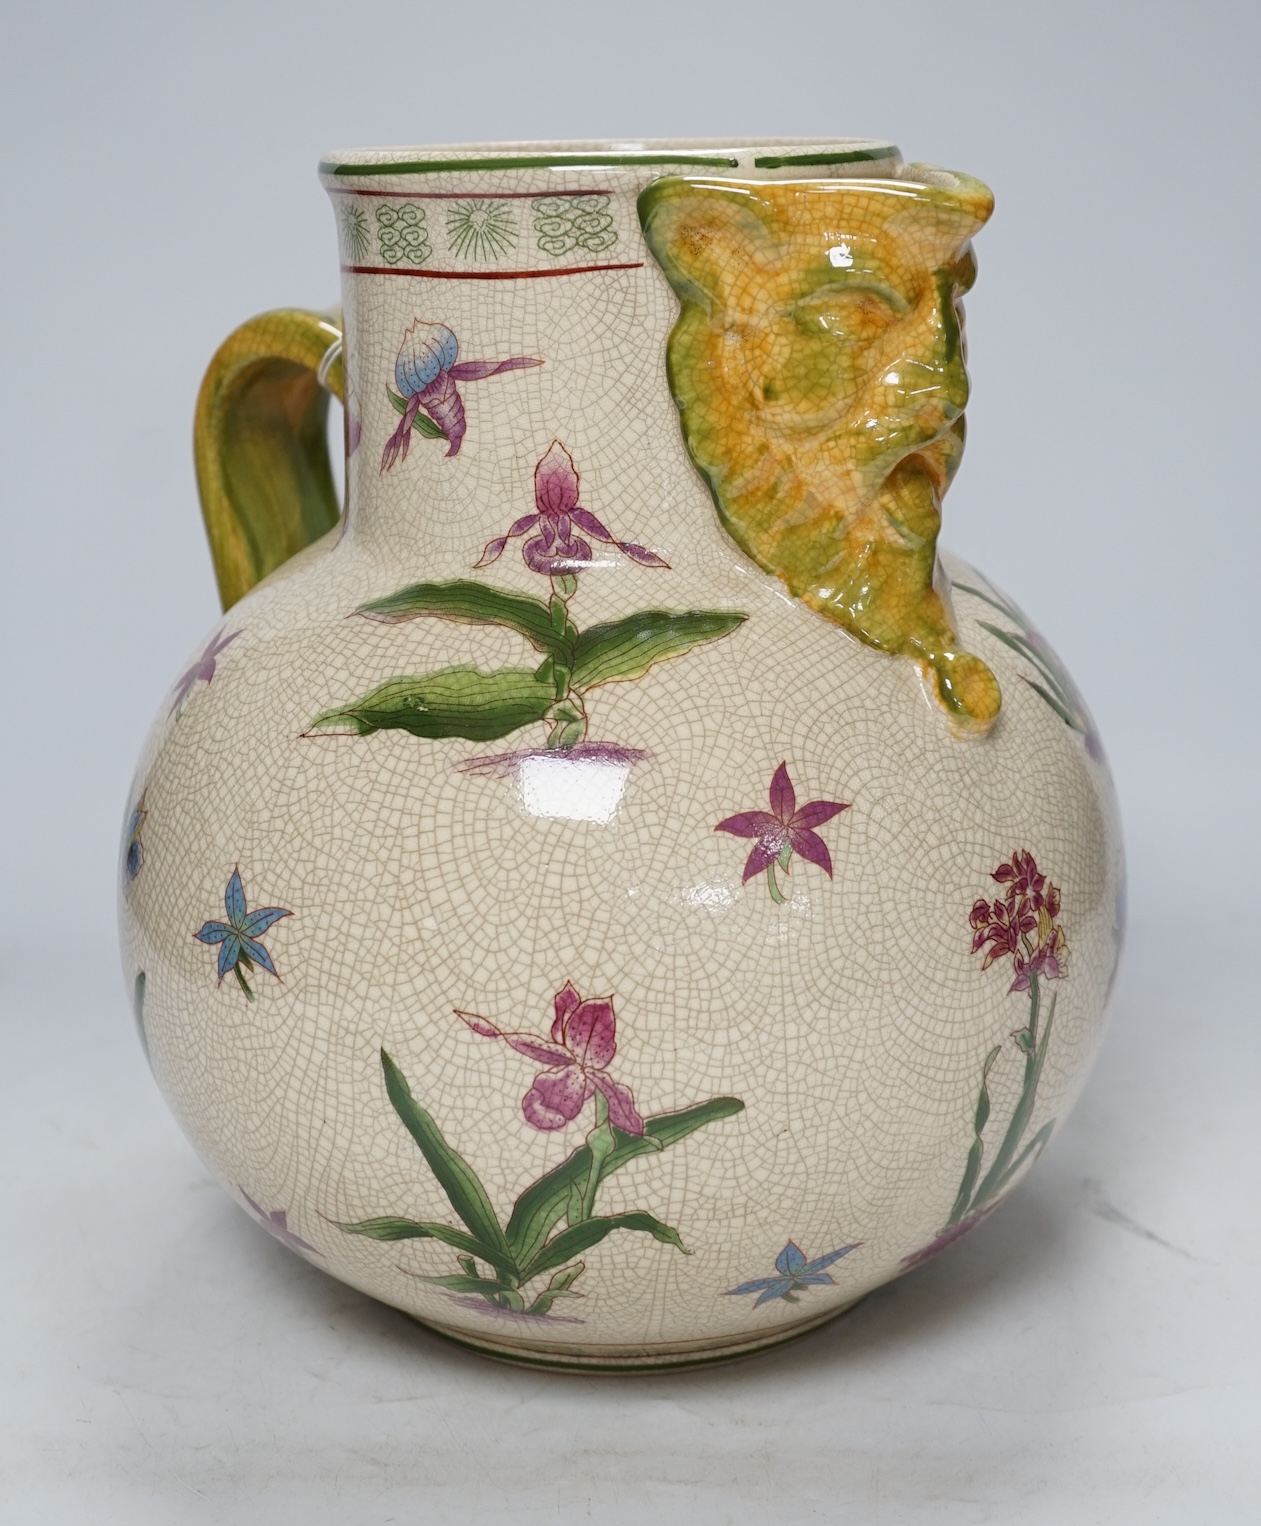 From the Studio of Fred Cuming. A large crackle glaze pottery mask jug, 29cm high. Condition - good